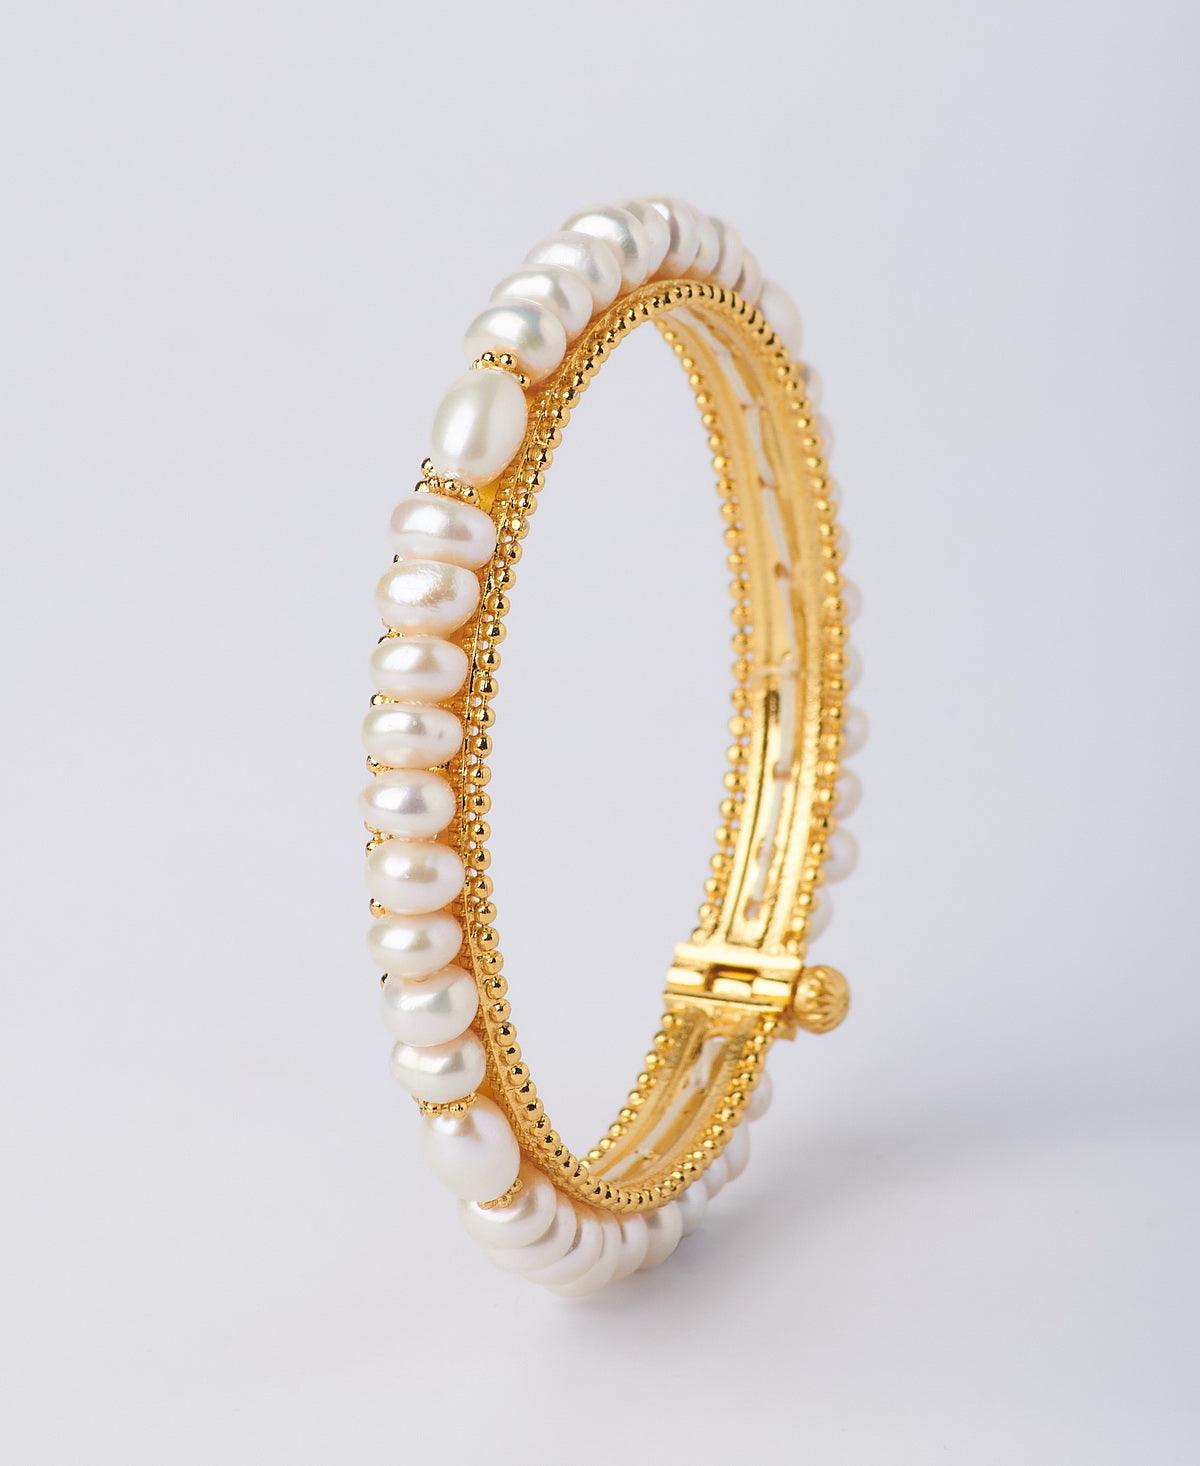 Chandrani Pearls - The perfect gift for every occasion! A sleek pearl  bracelet that will make you shine at work, or a party, or for everyday  glamour. We have pearl and silver